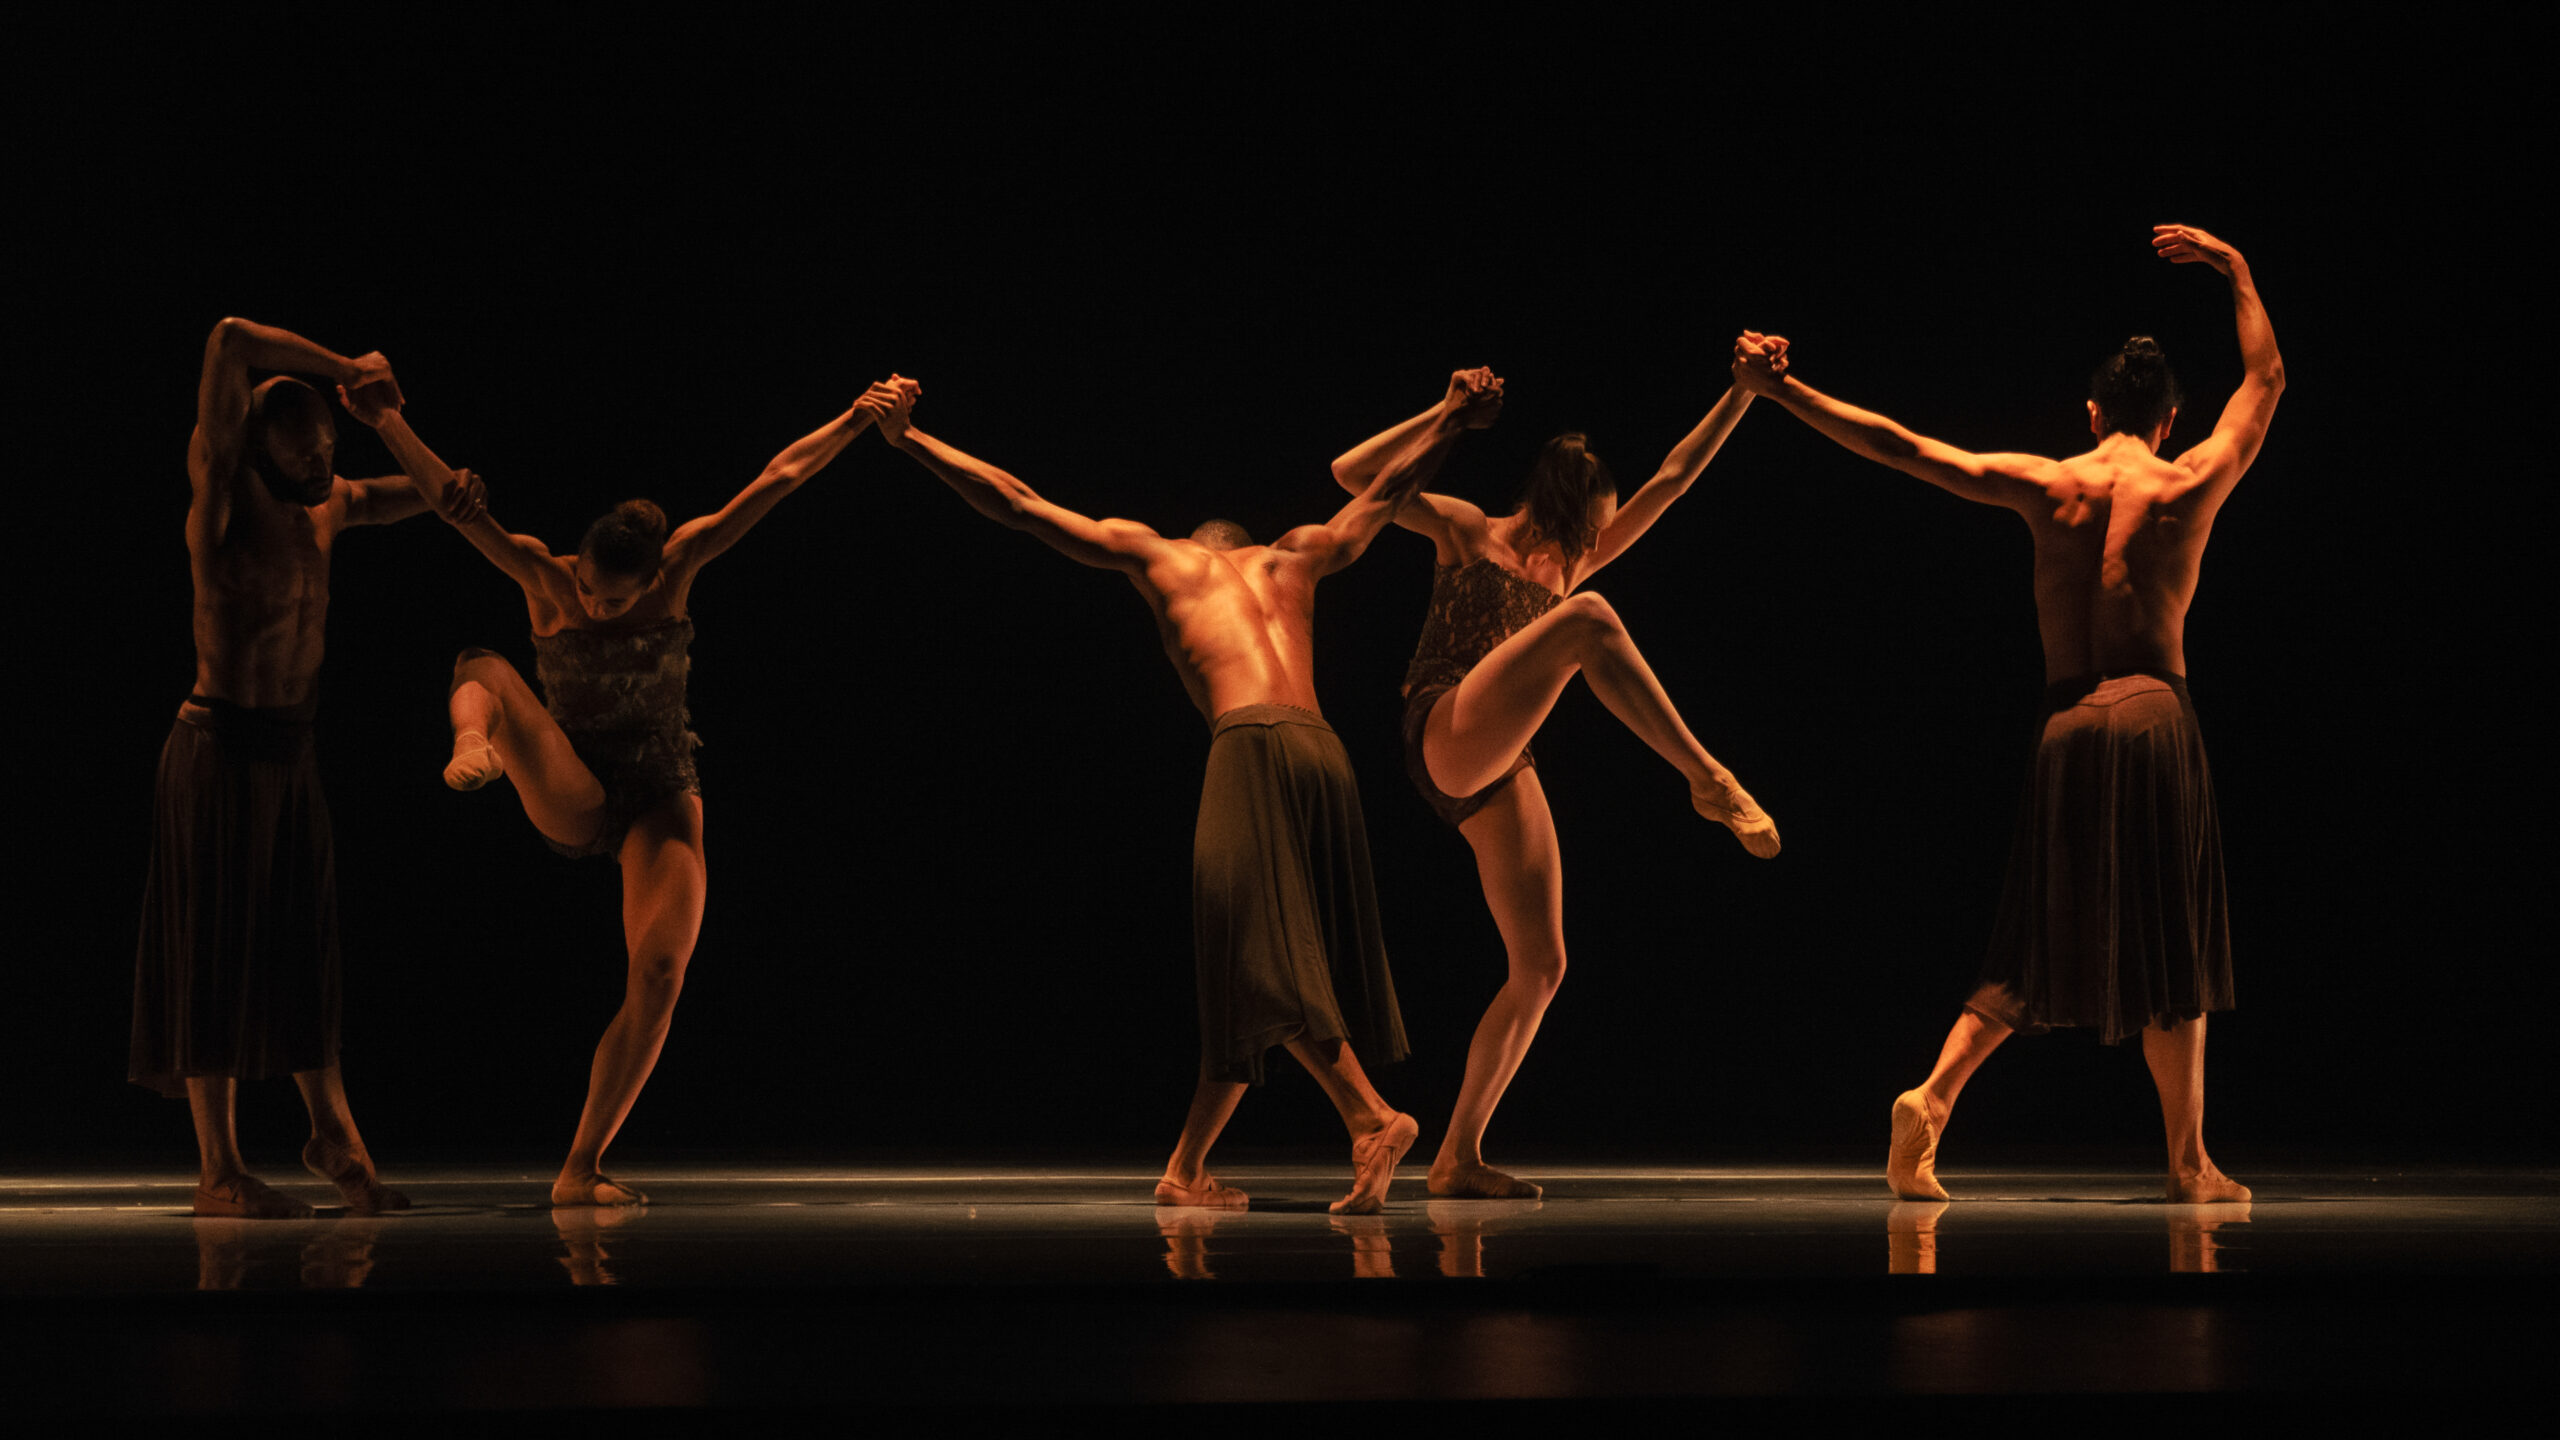 Alonzo King LINES Ballet company dancers performing in "Deep River"